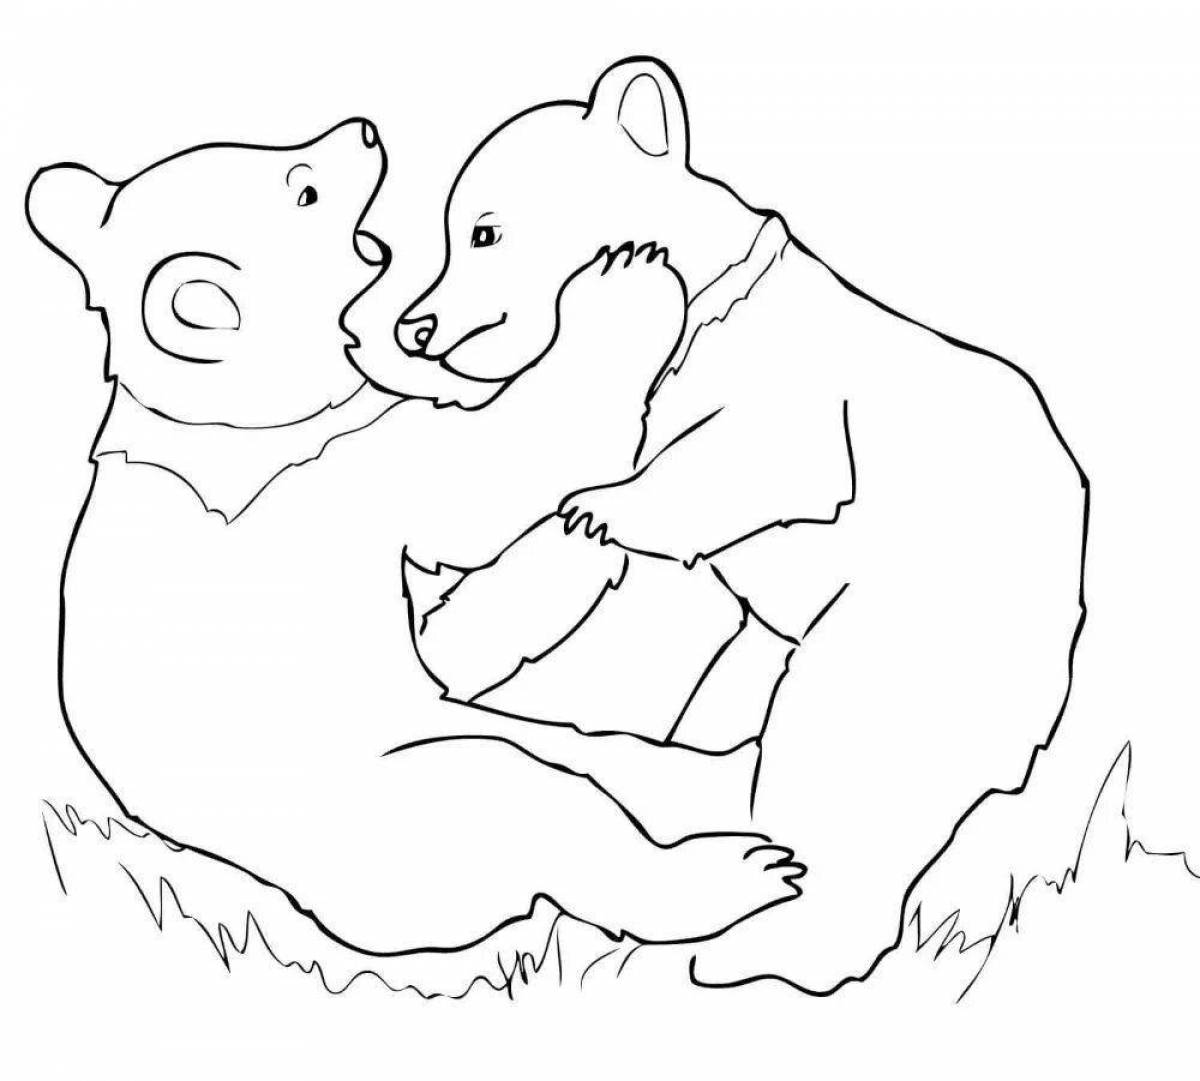 Colourful bear family coloring book